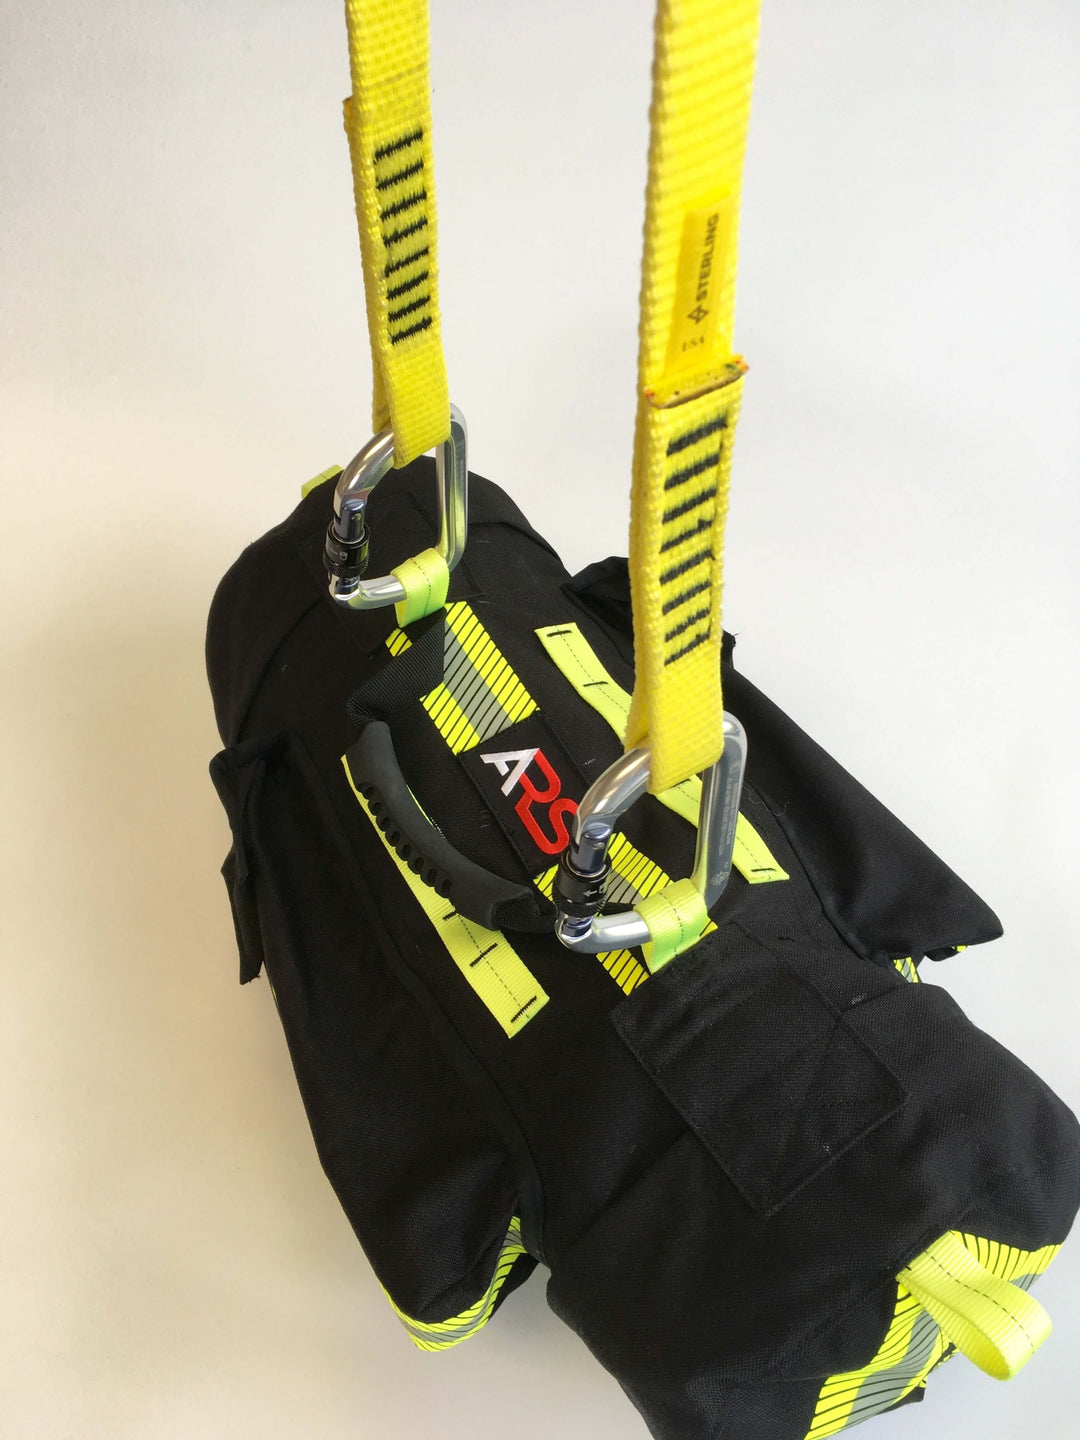 Top view of Fireground Special Operations Rope Bag